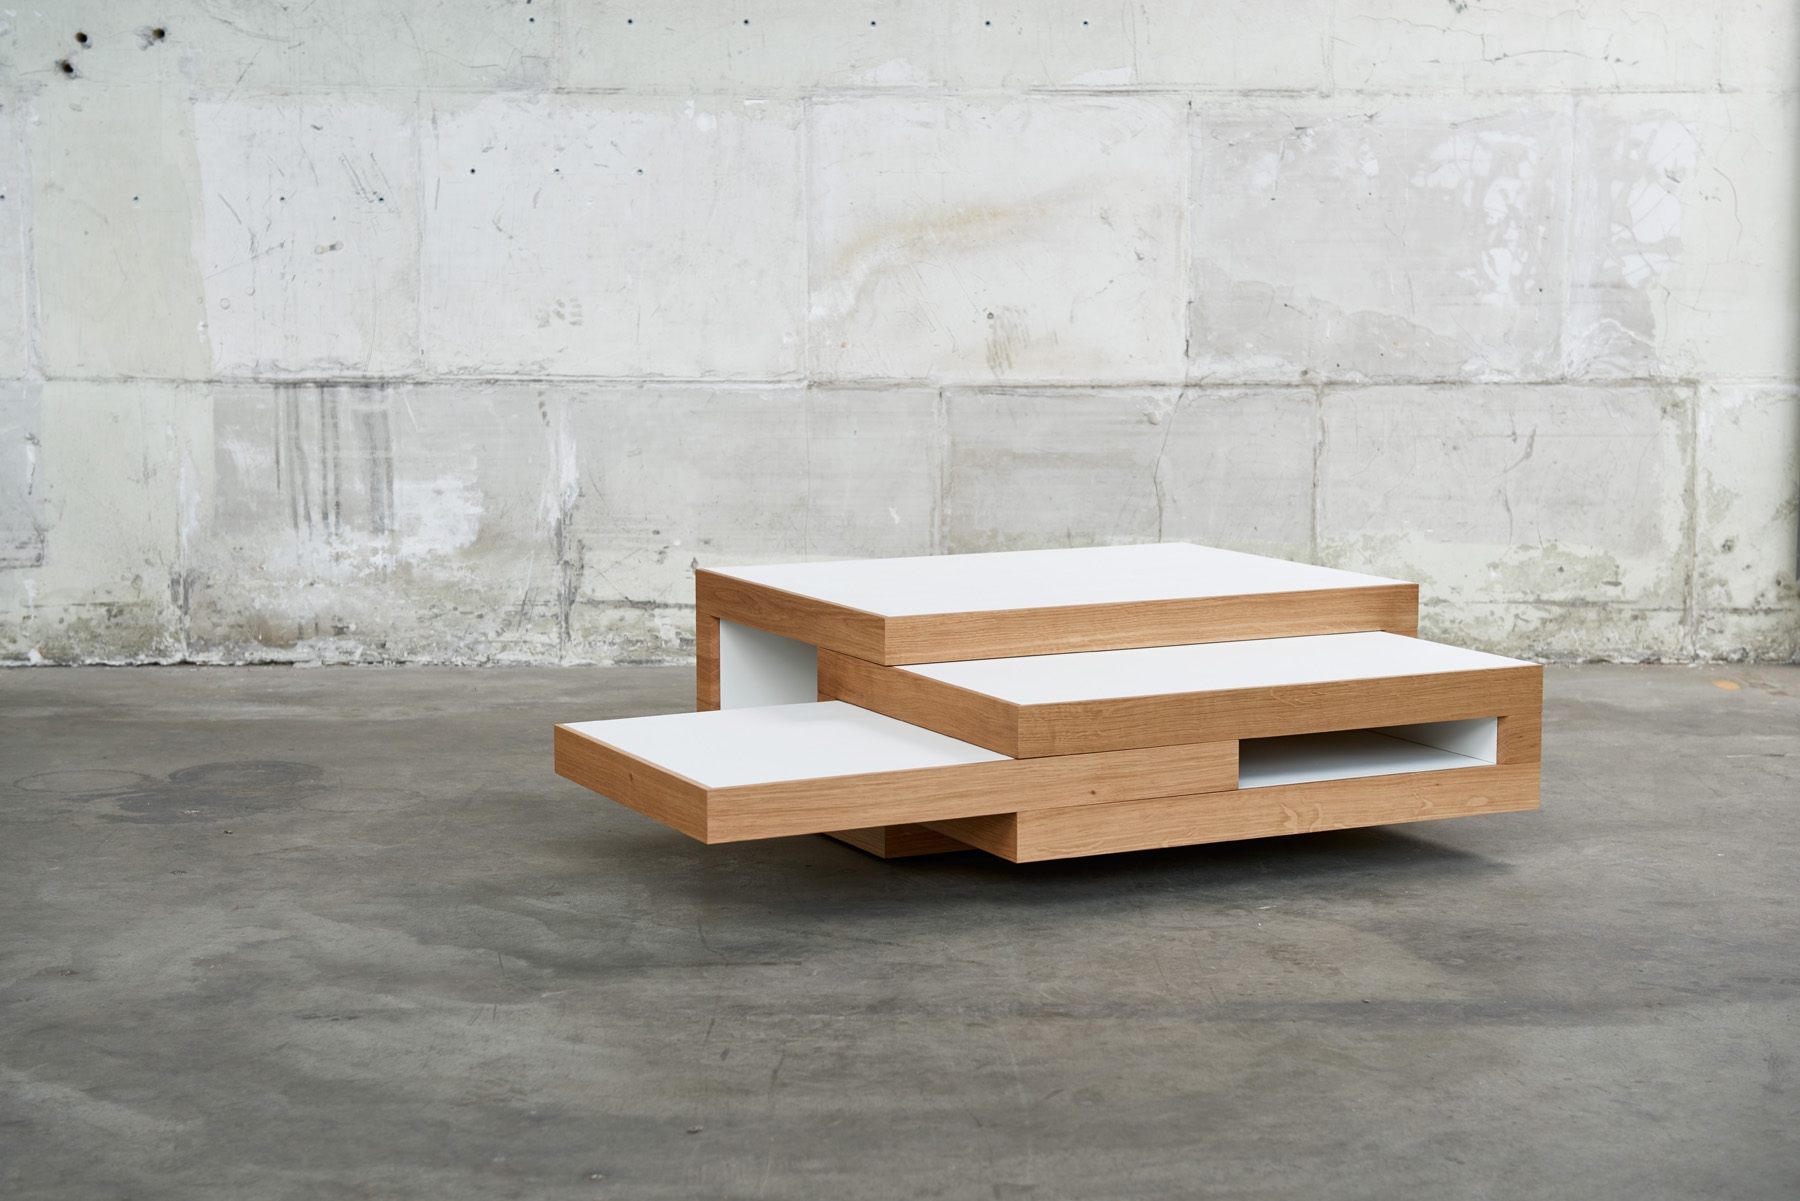 Table can be converted to various configurations